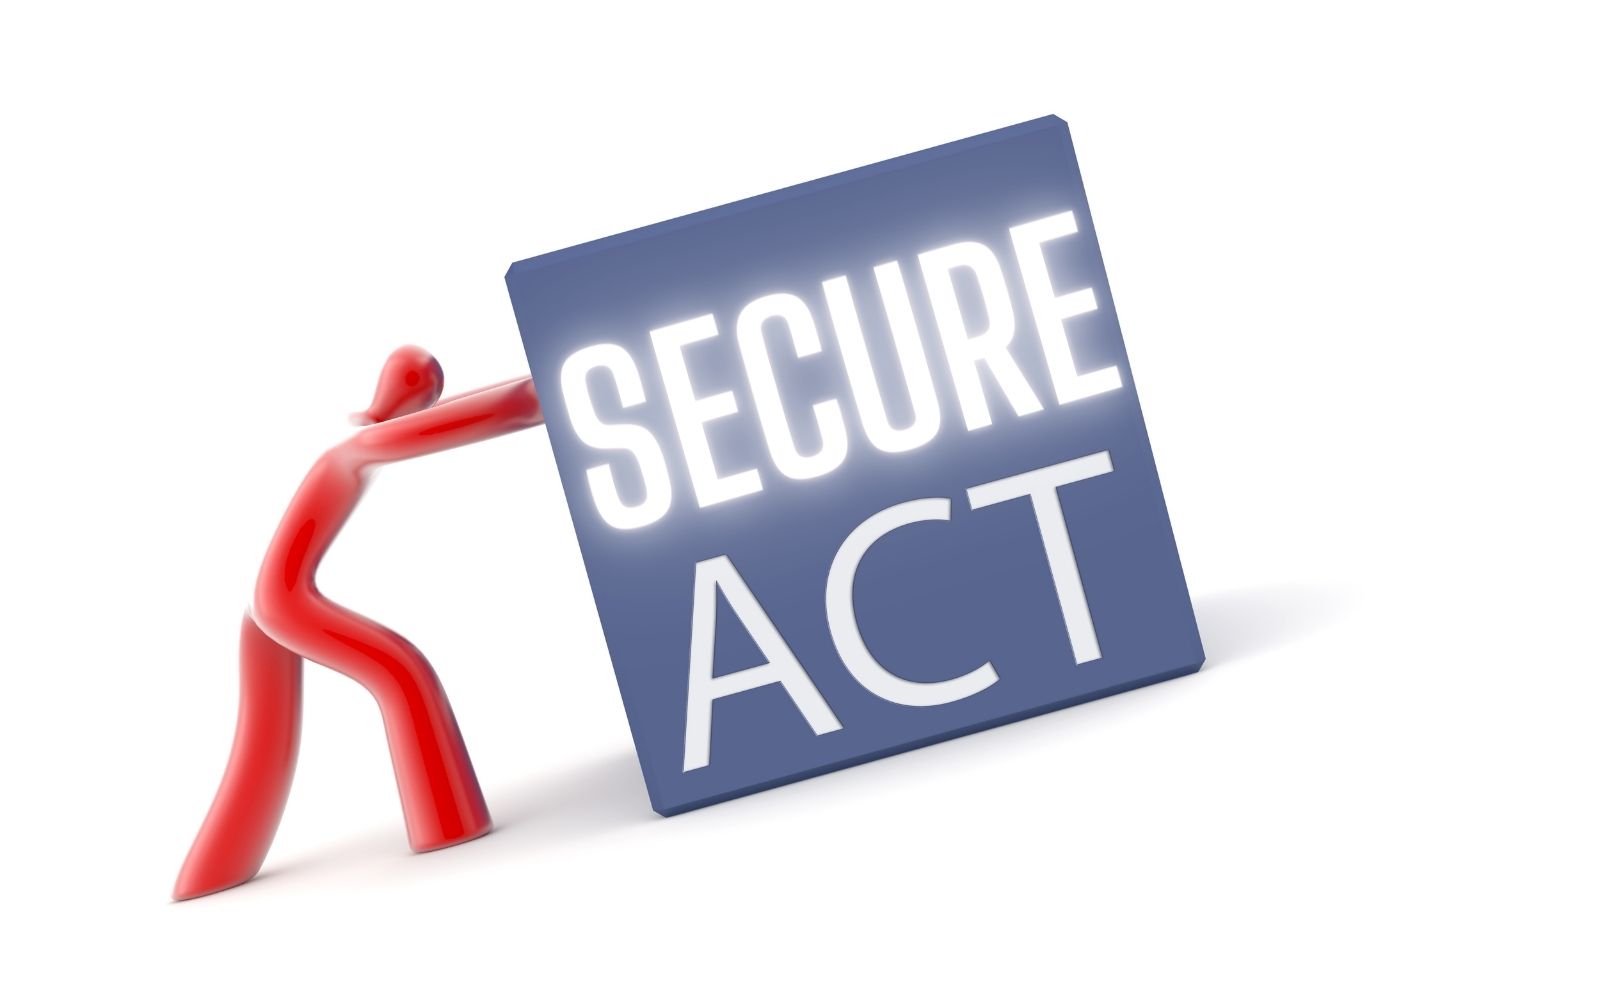 secure act and long term insurance